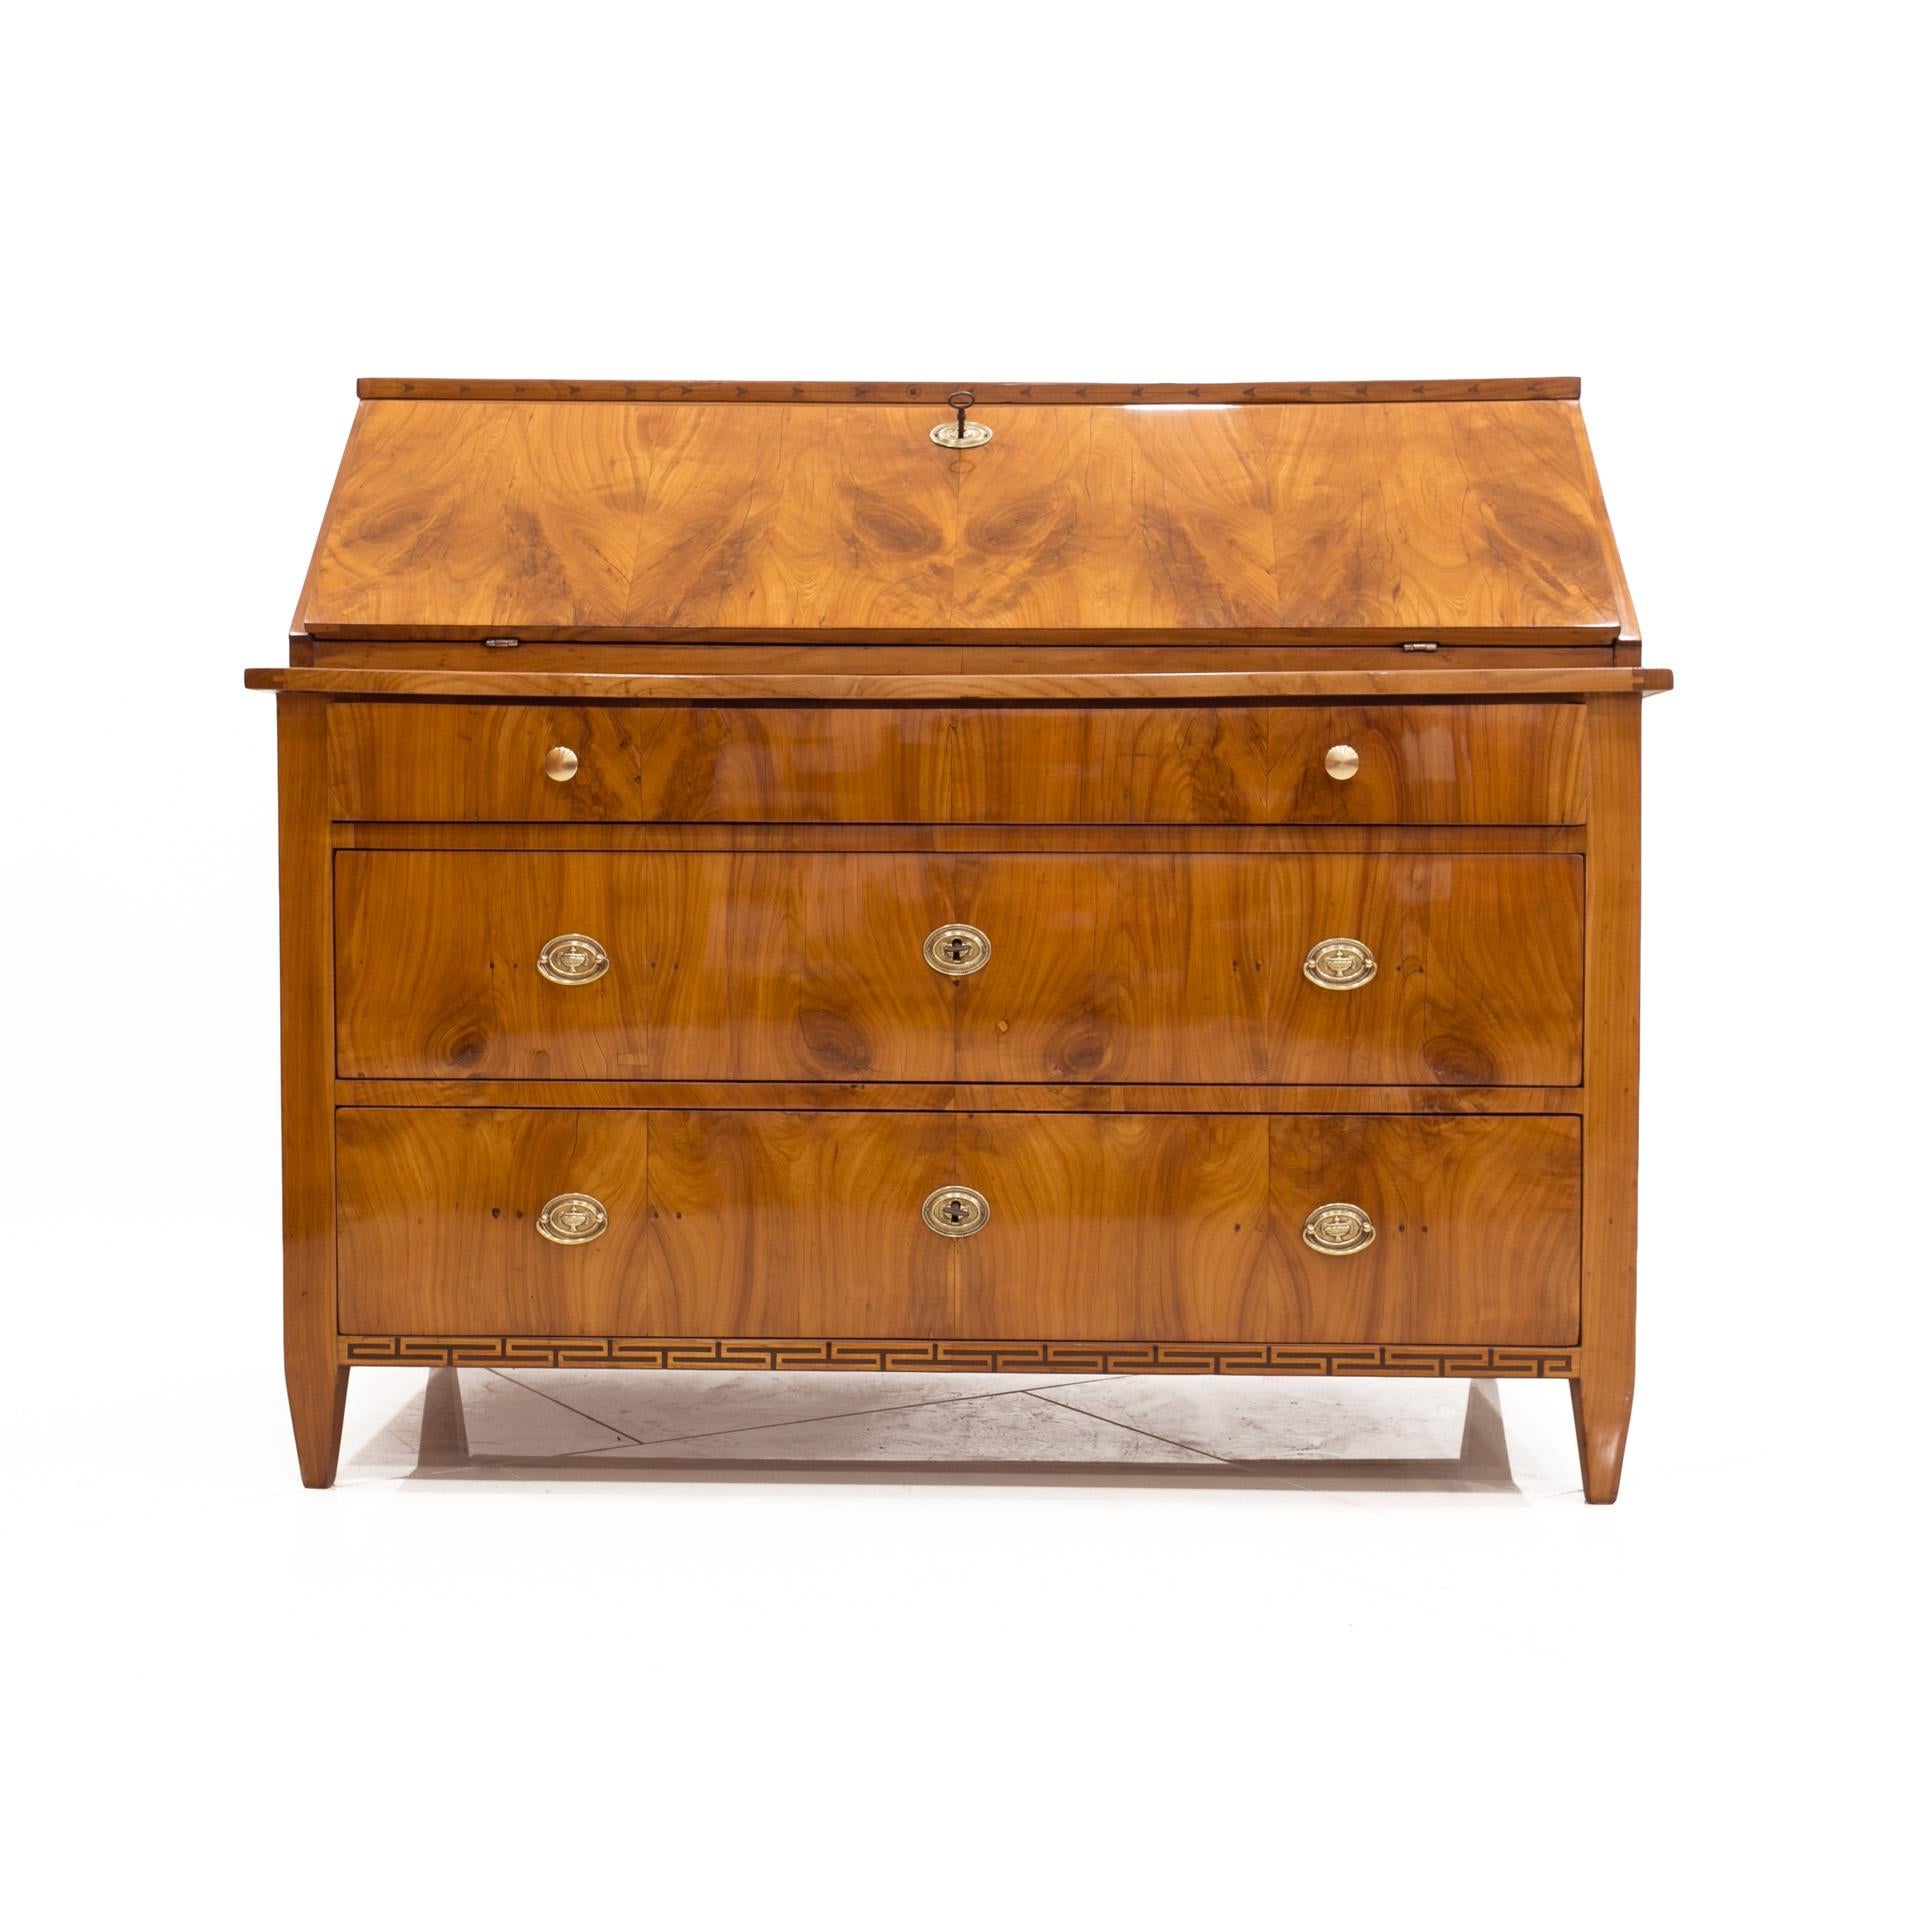 This Biedermeier secretary comes from Germany and was constructed, circa 1825. It is made of coniferous wood, veneered with cherrywood with beautiful wood patterns. This secretary desk has undergone a professional renovation process. Surface is